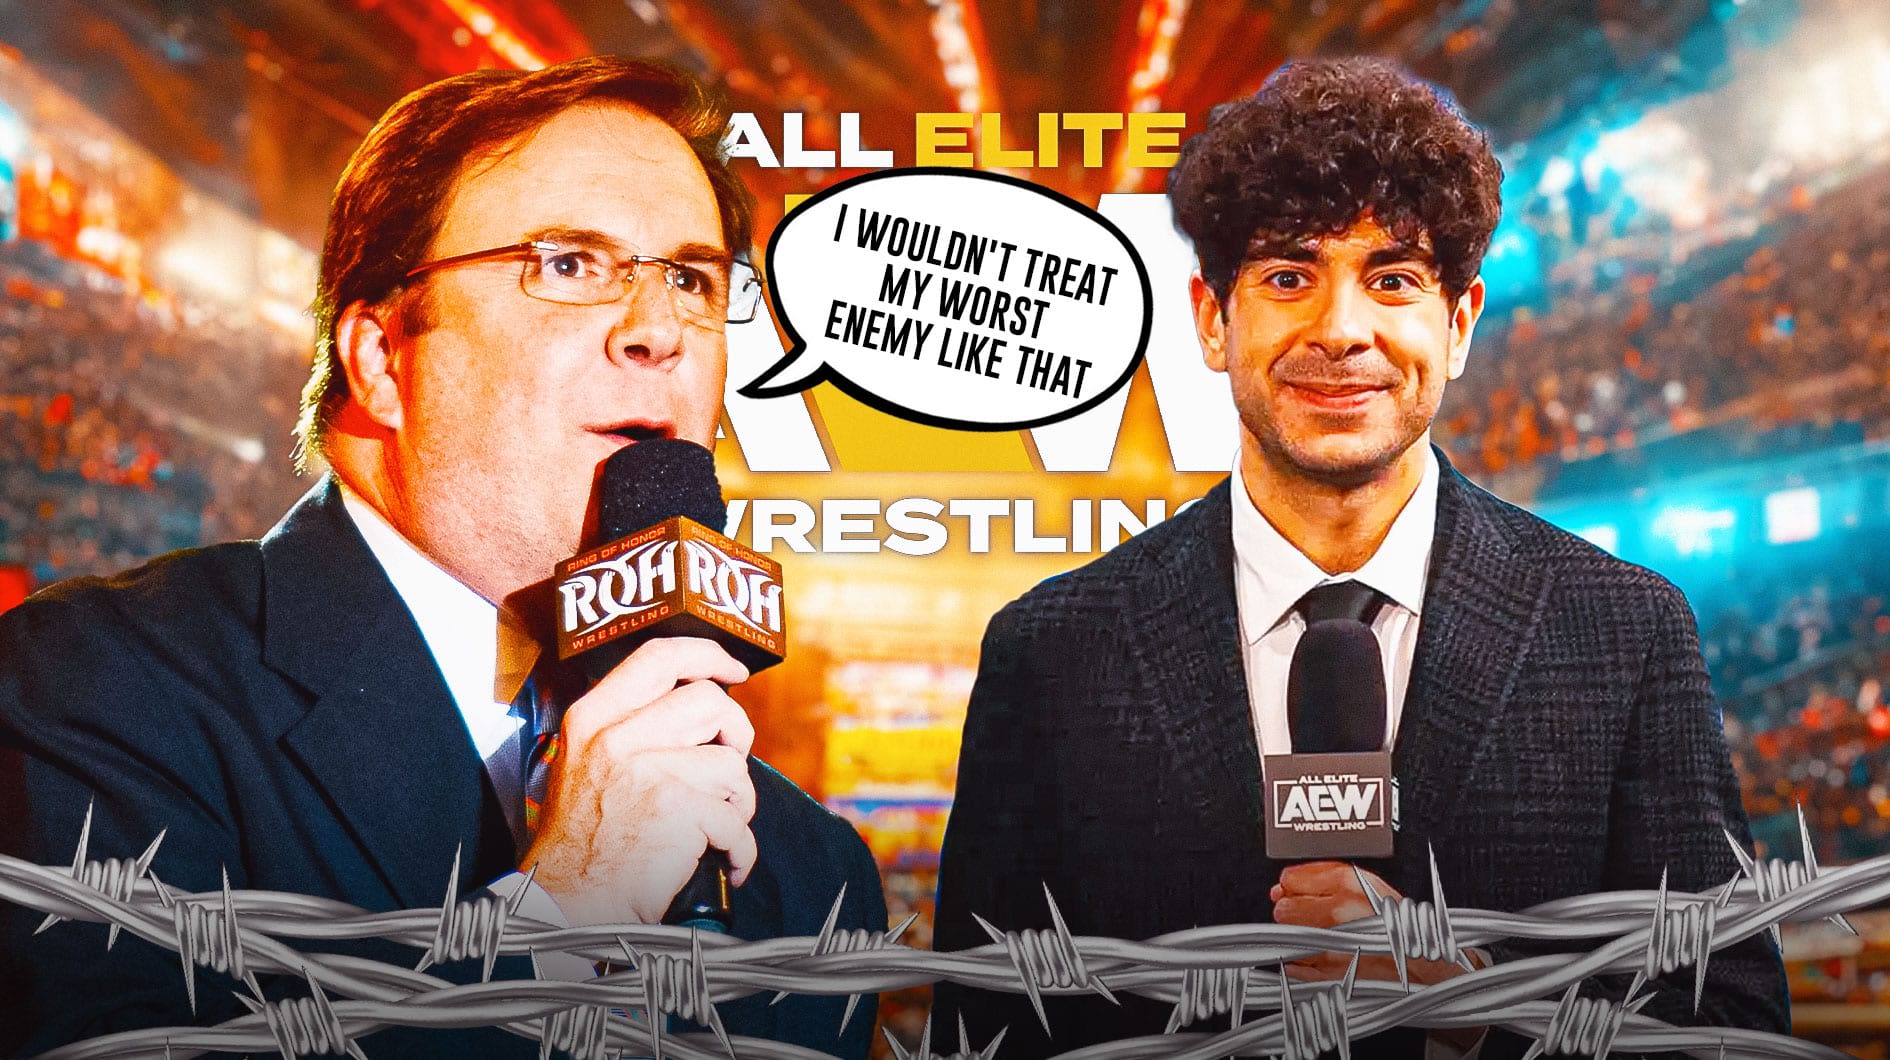 Kevin Kelly finally gives his side of the story on why he was fired by Tony Khan and AEW